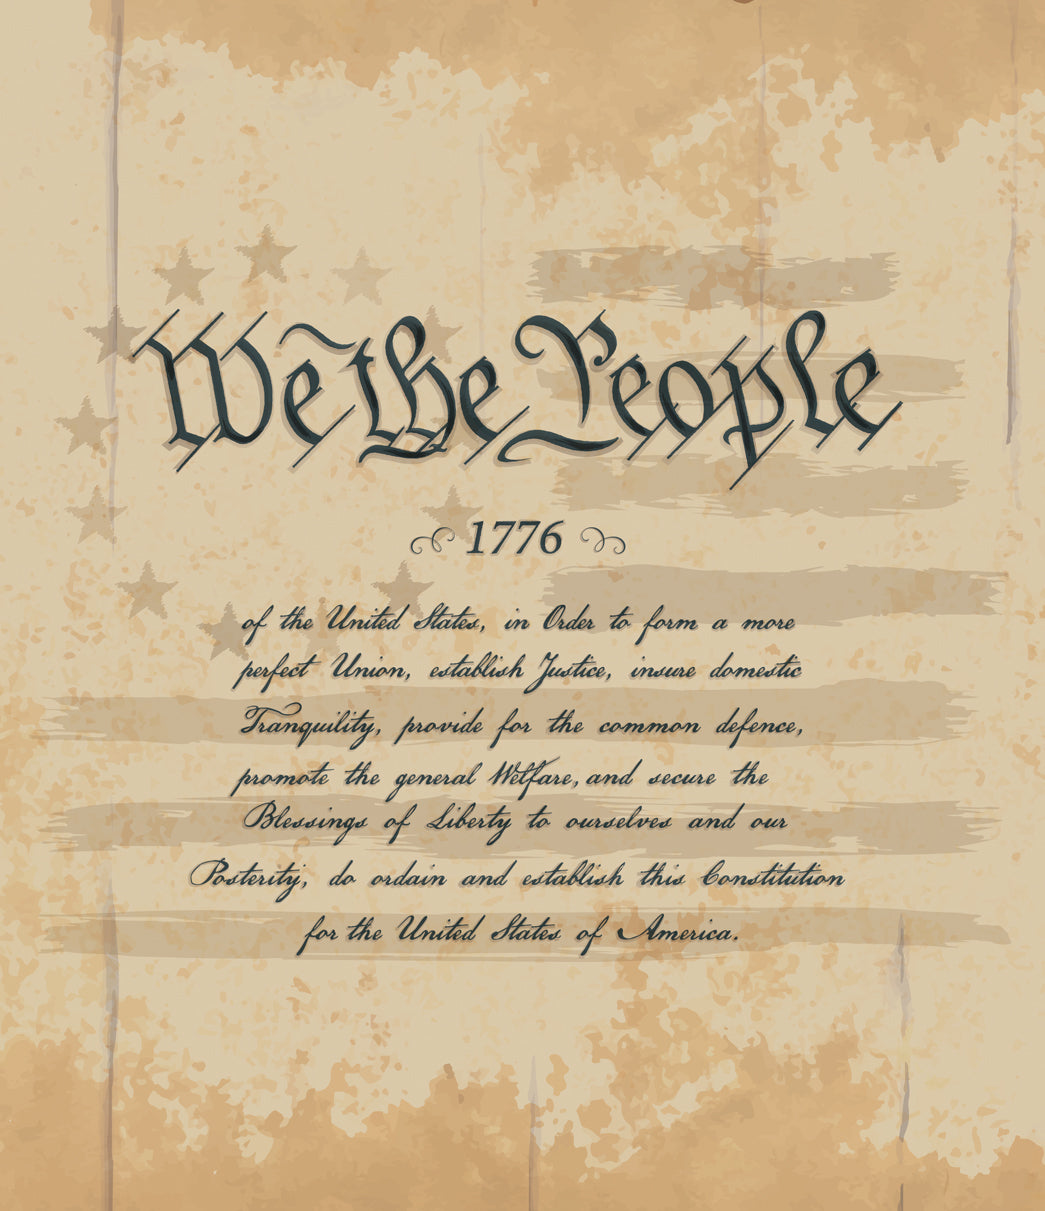 "We The People"